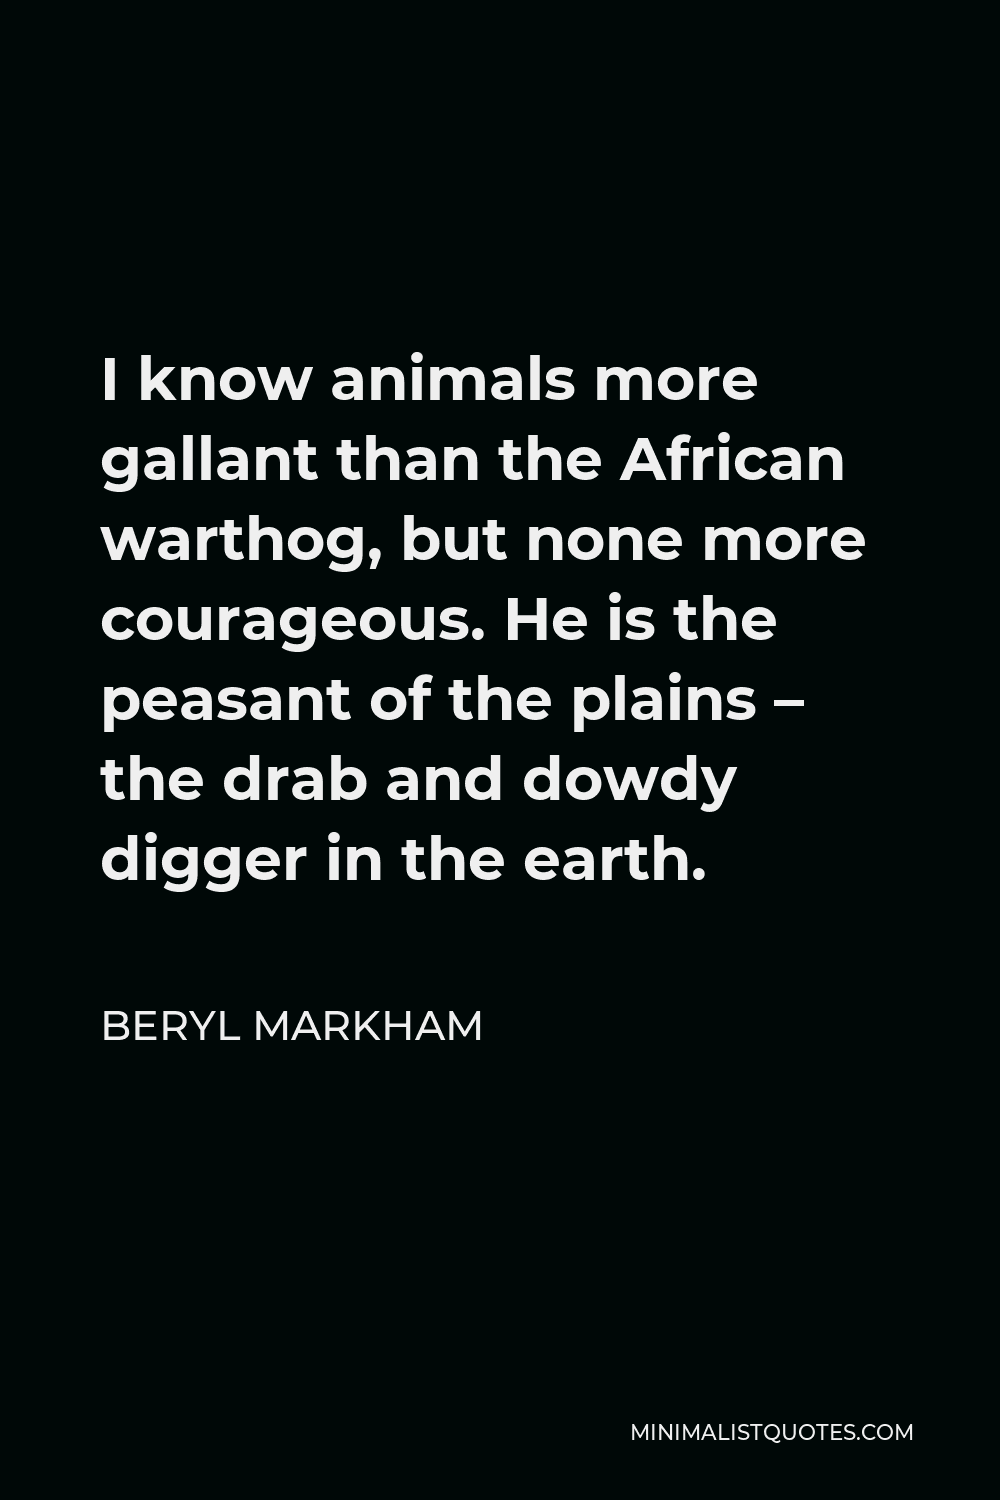 Beryl Markham Quote - I know animals more gallant than the African warthog, but none more courageous. He is the peasant of the plains – the drab and dowdy digger in the earth.